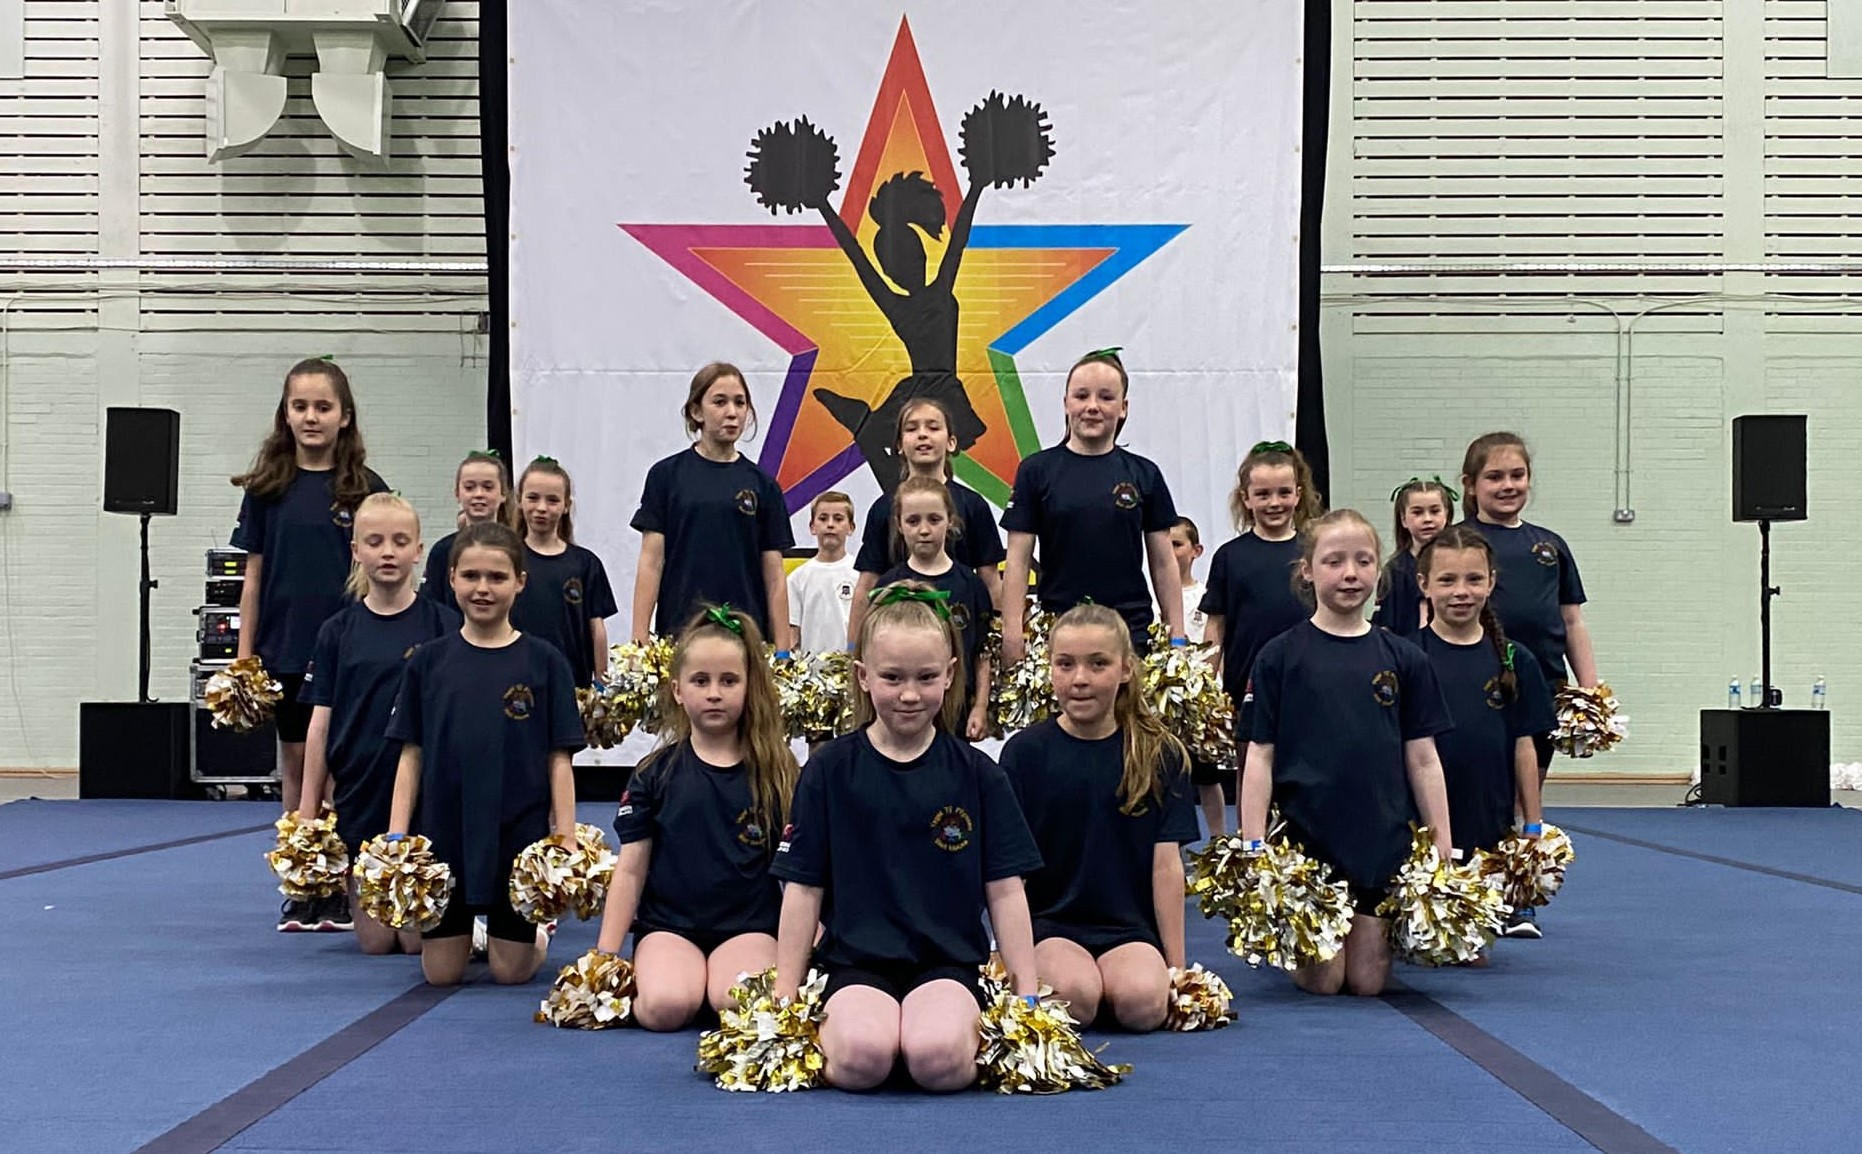 Pupils at Ysgol Ty Ffynnon took part in a cheerleading festival.